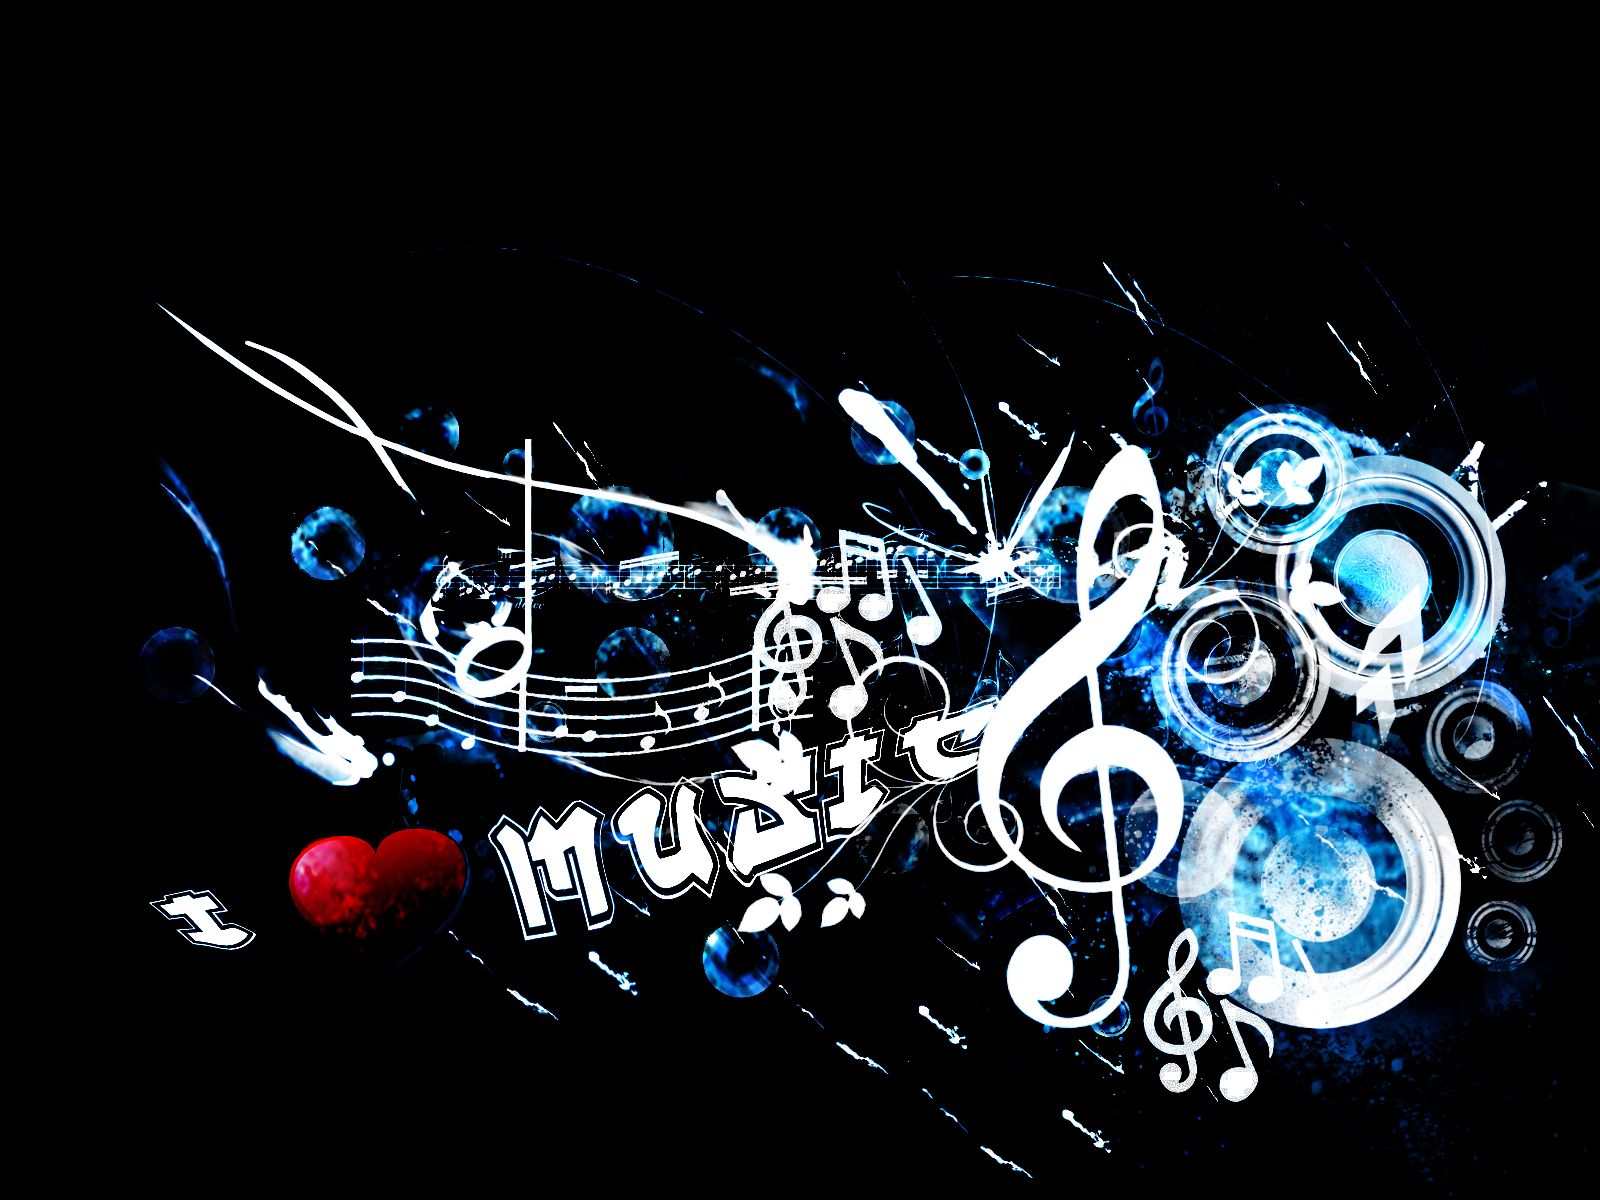 cool music background designs